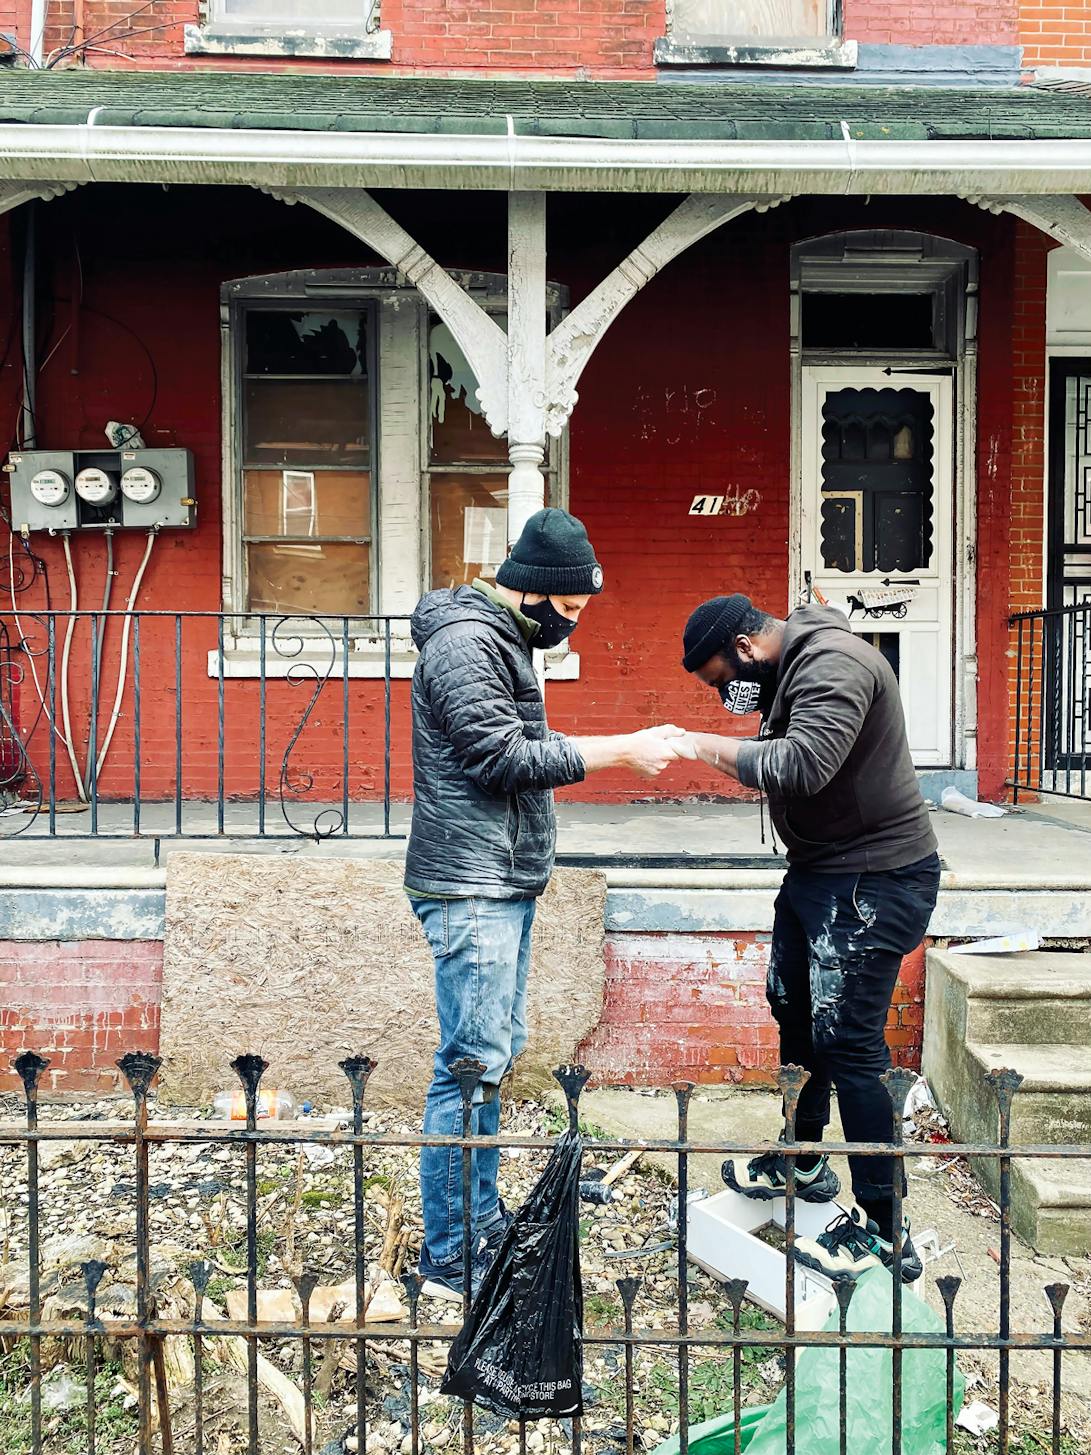 two people in face masks and jackets working together on a project in a yard outside a brick building